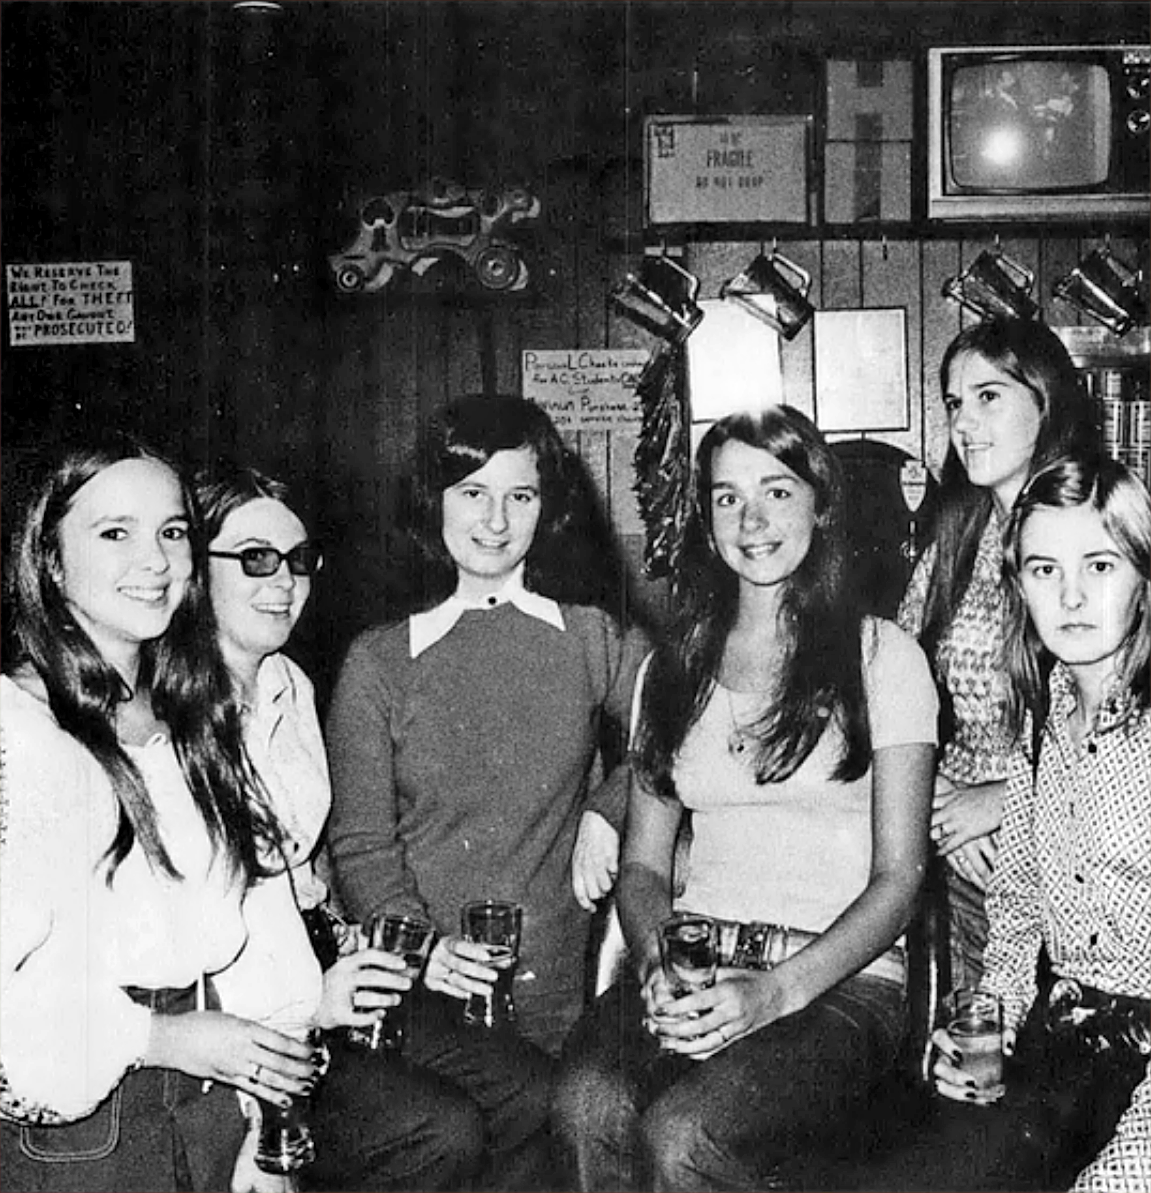 25 Found-Photos Of Youthful Partying, Drinking And Other Tomfoolery In The  1970s Flashbak